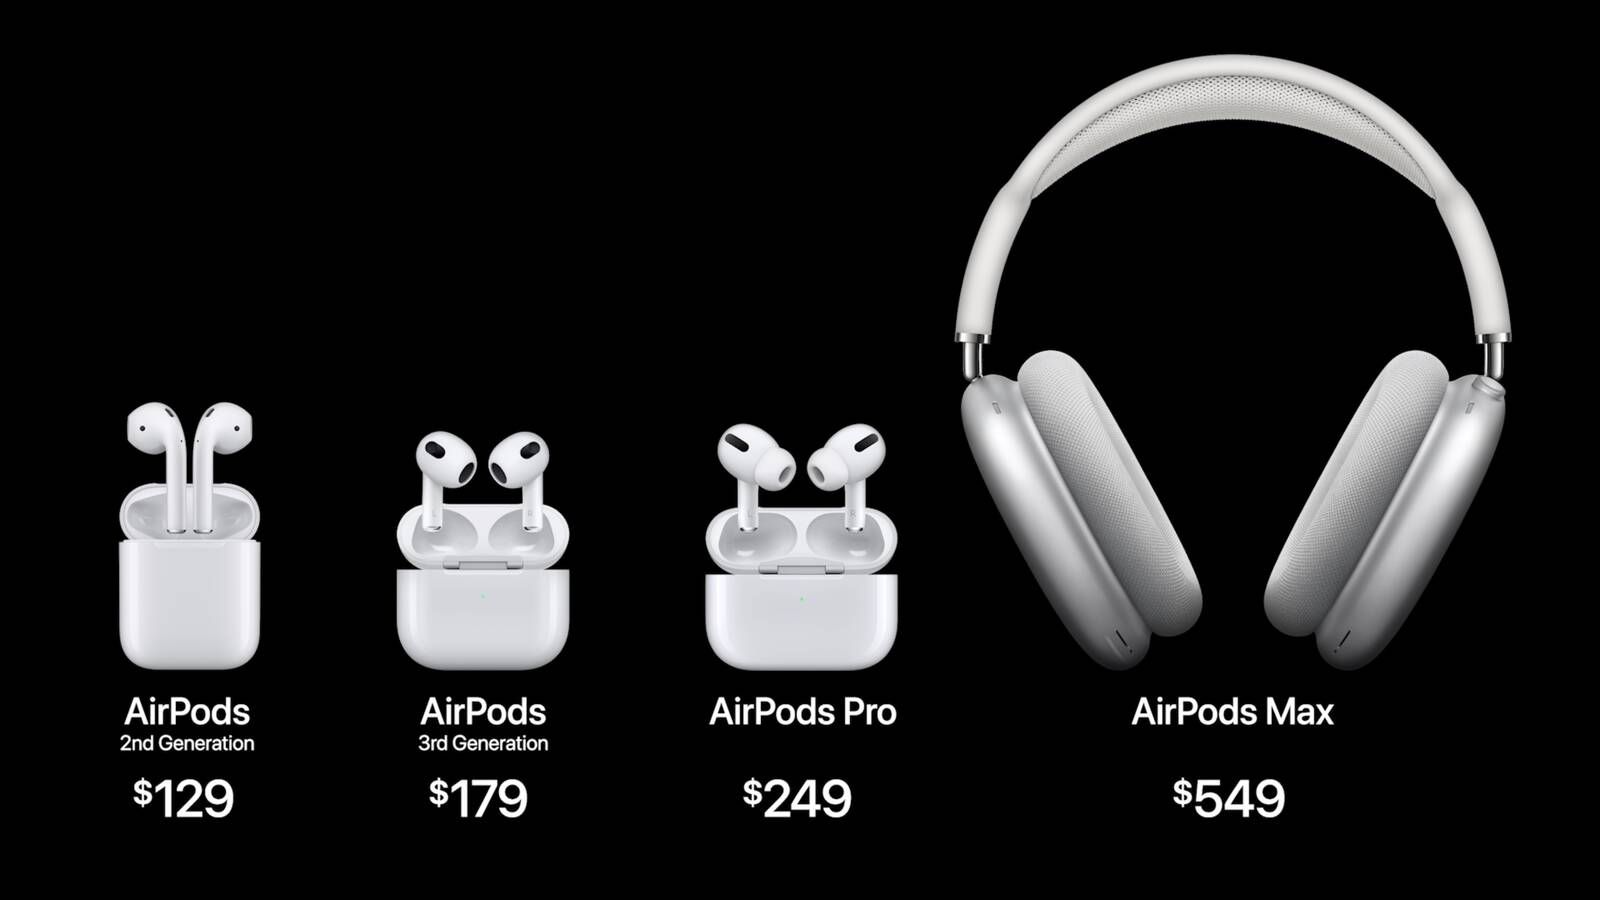 AirPods 3 launch did not happen at iPhone 13 event, so when are